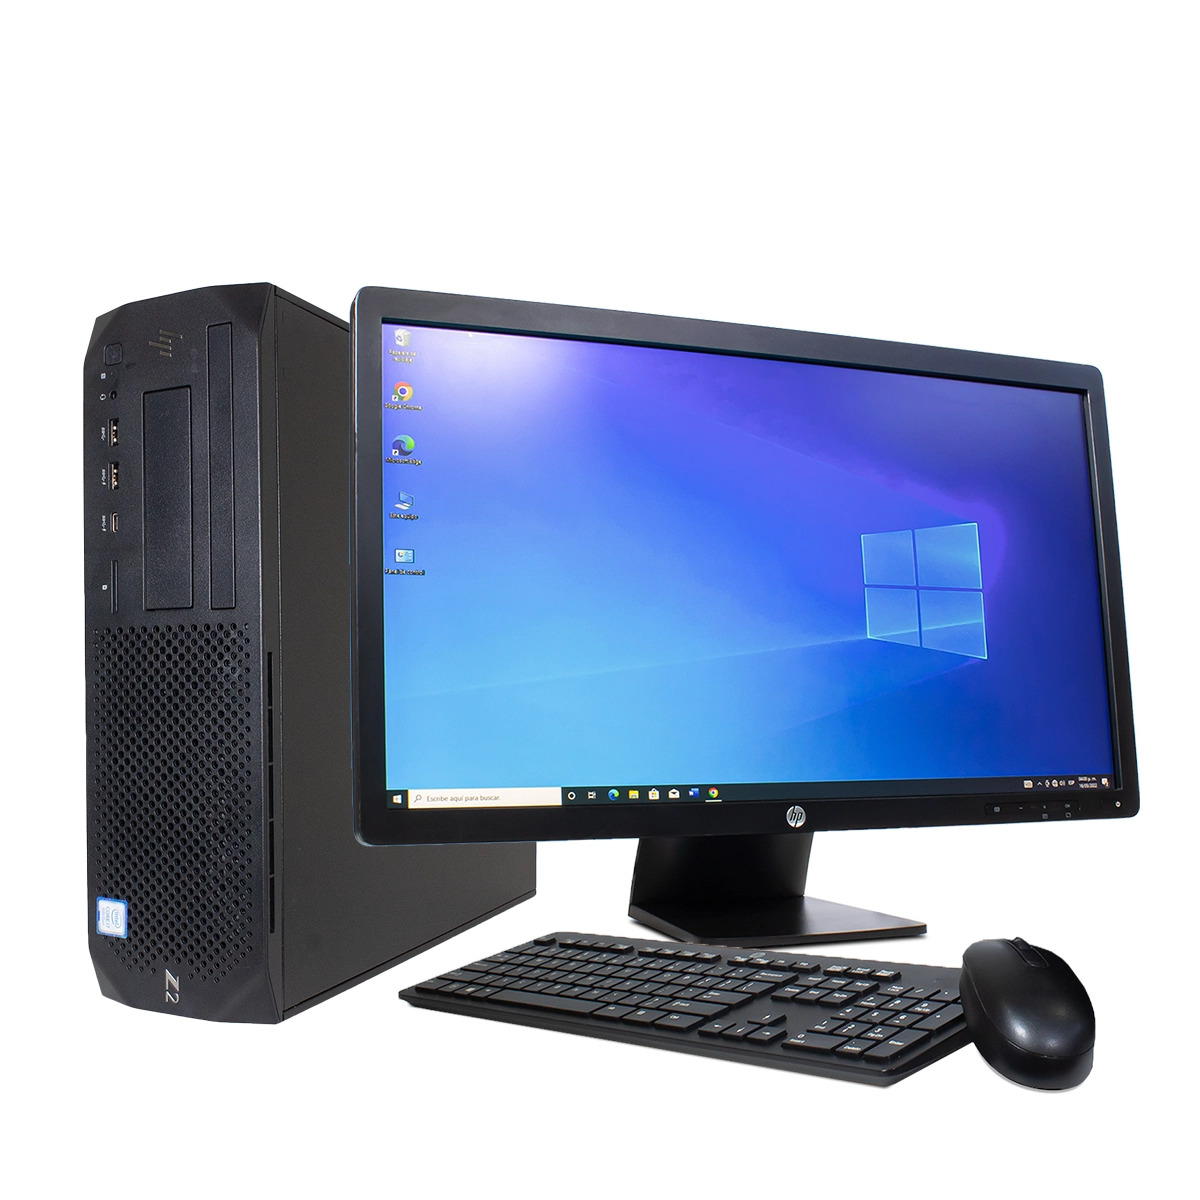 Equipo Completo HP Z2 G4 Workstation i7 8th 480Gb SSD 16Gb RAM